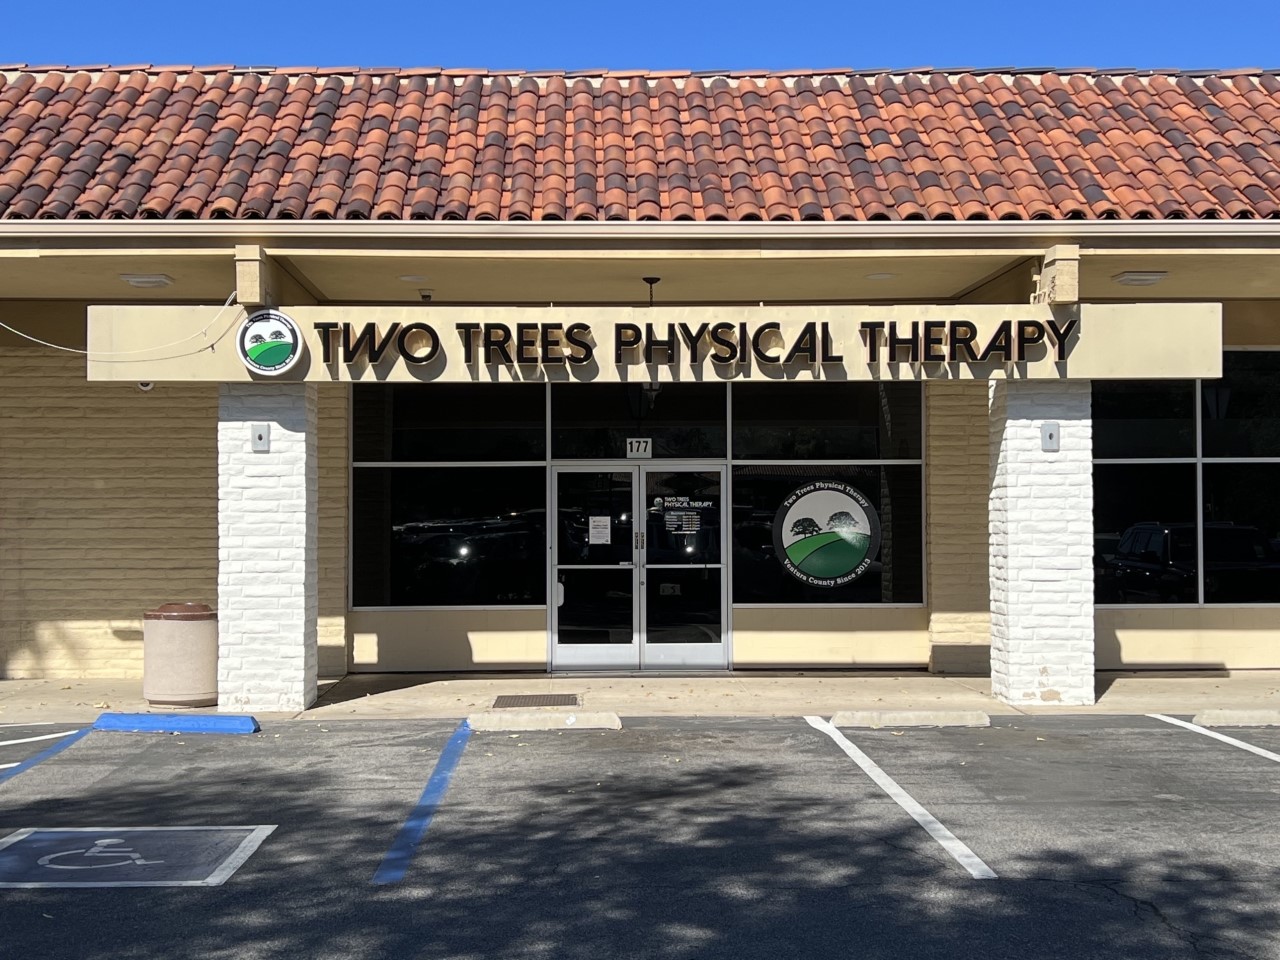 Entrance - Two Trees Physical Therapy Newbury Park Two Trees Physical Therapy Newbury Park (805)586-0290